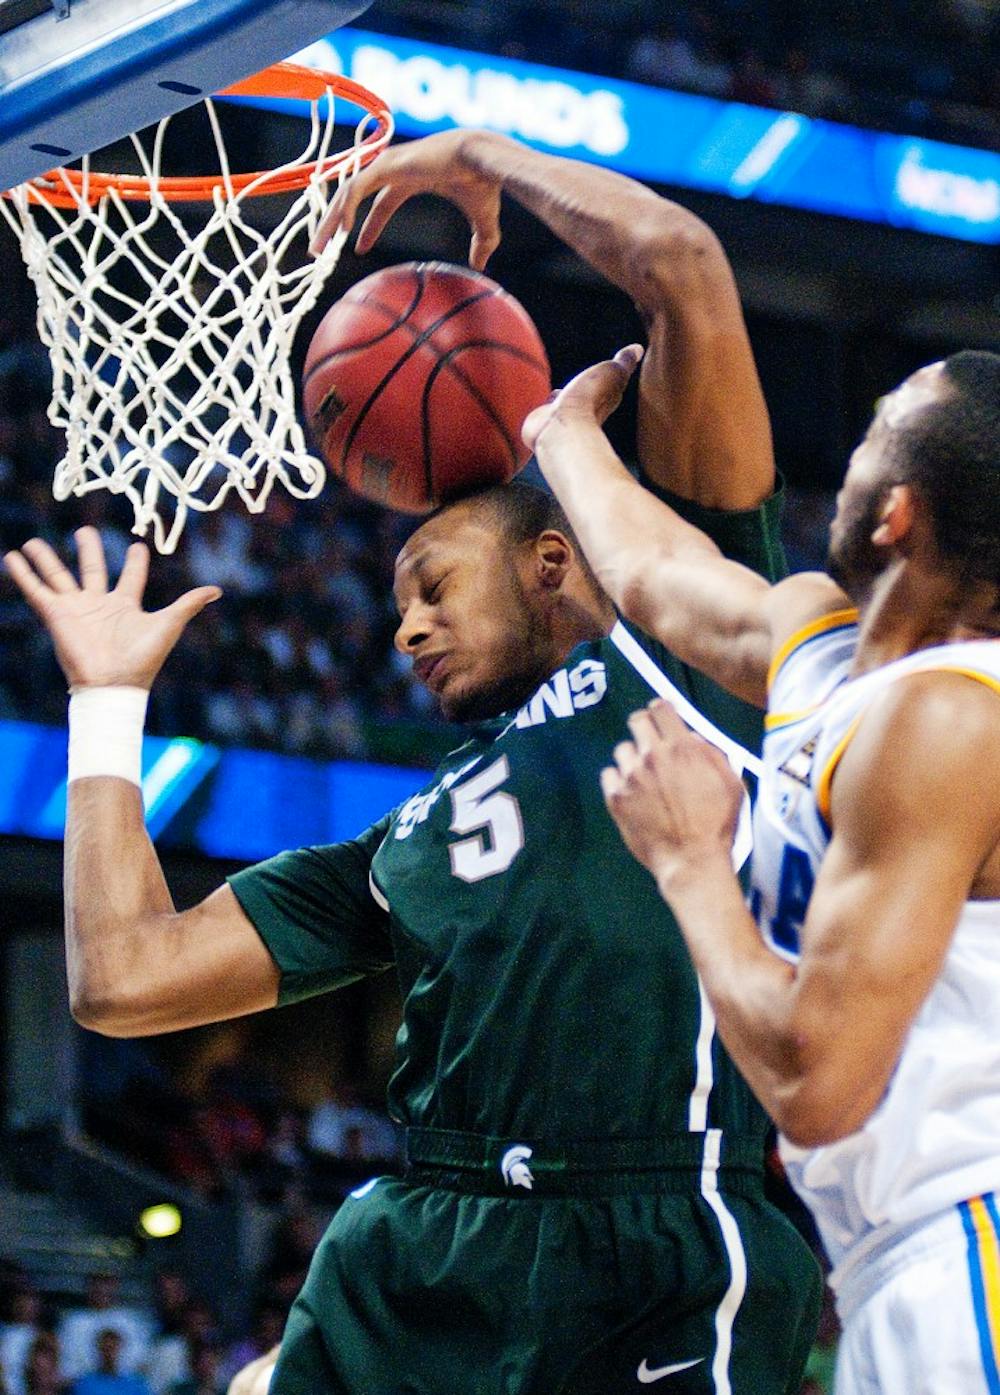 Freshman center Adreian Payne gets the ball knocked away by UCLA guard Malcolm Lee. The Spartans are down, 42-24, against the Bruins at the half in the second round of the 2011 NCAA Division 1 Men's Basketball Championship on Thursday night at St. Pete Times Forum in Tampa, Fla. Josh Radtke/The State News